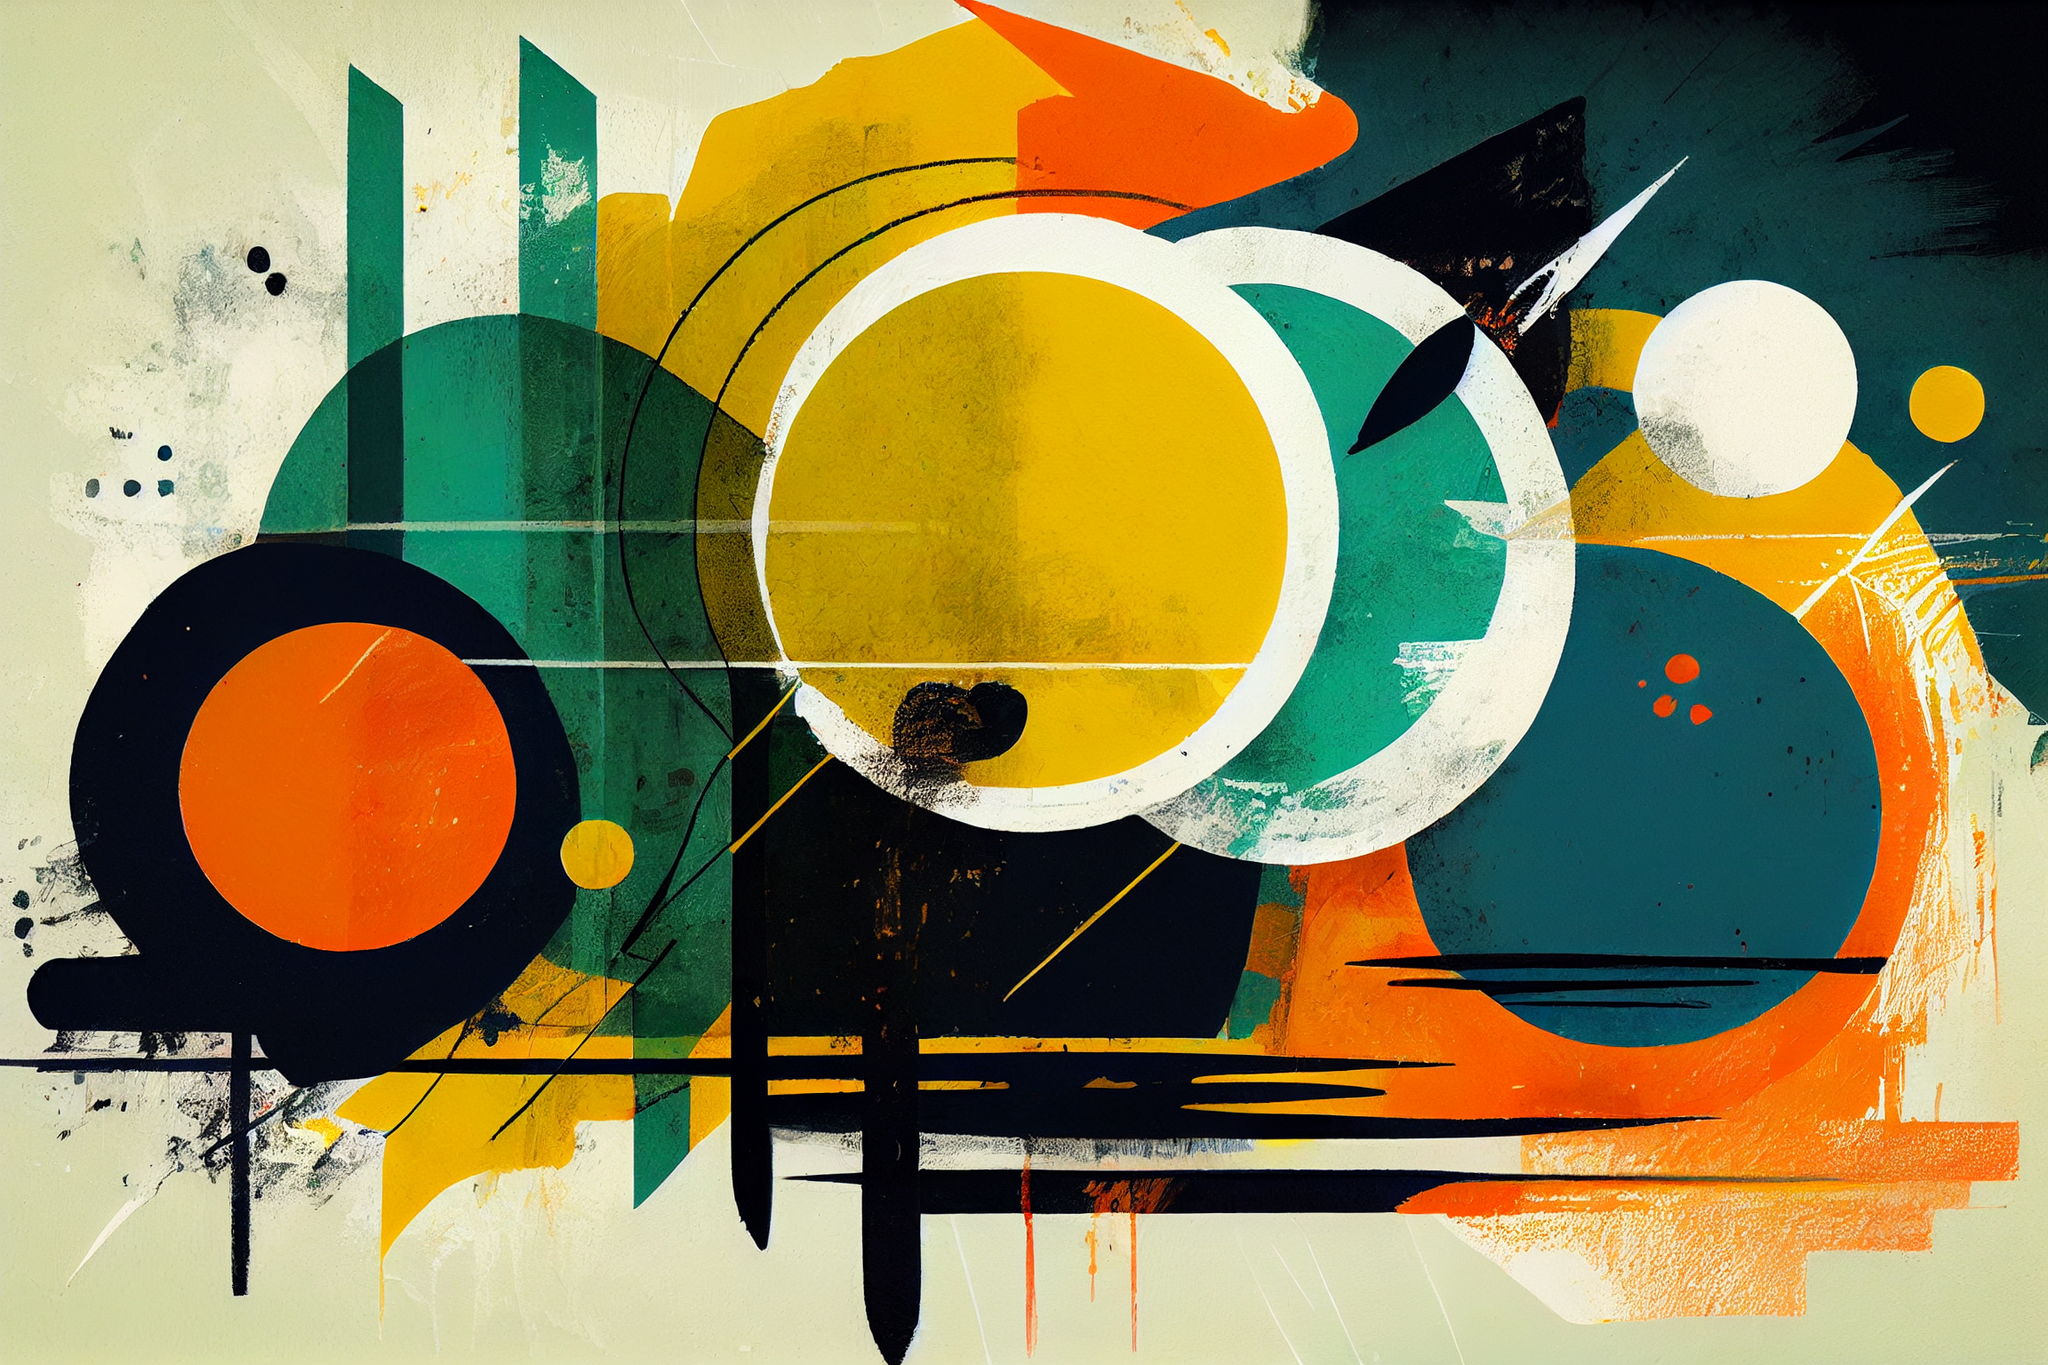 Circular Fusion: An Abstract Art Print of Geometric Shapes and Textured Brush Strokes